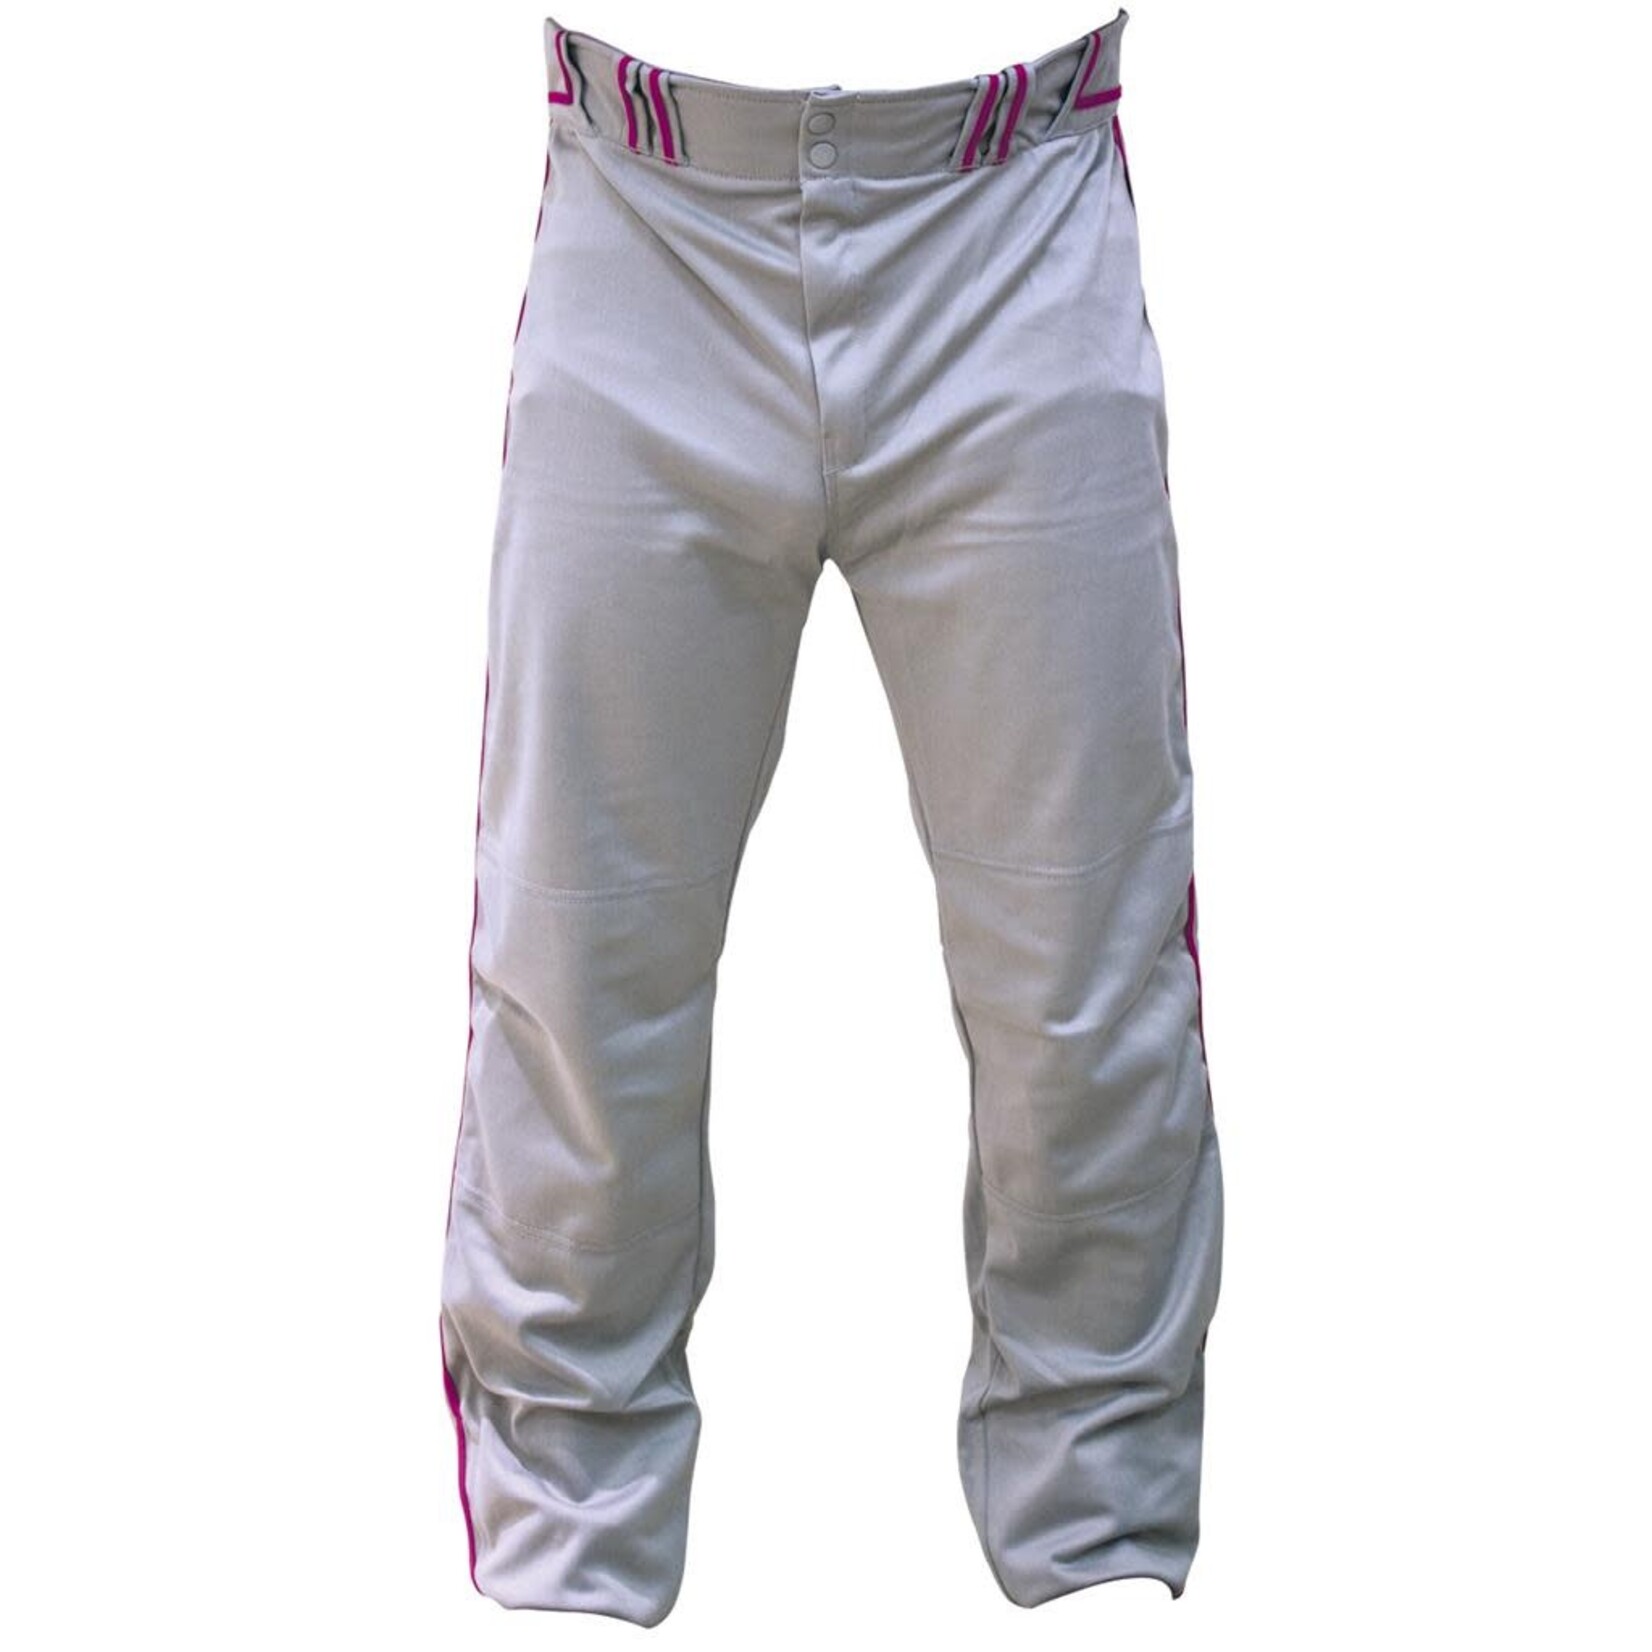 Louisville LOUISVILLE STOCK PANT GREY WITH PIPING JR